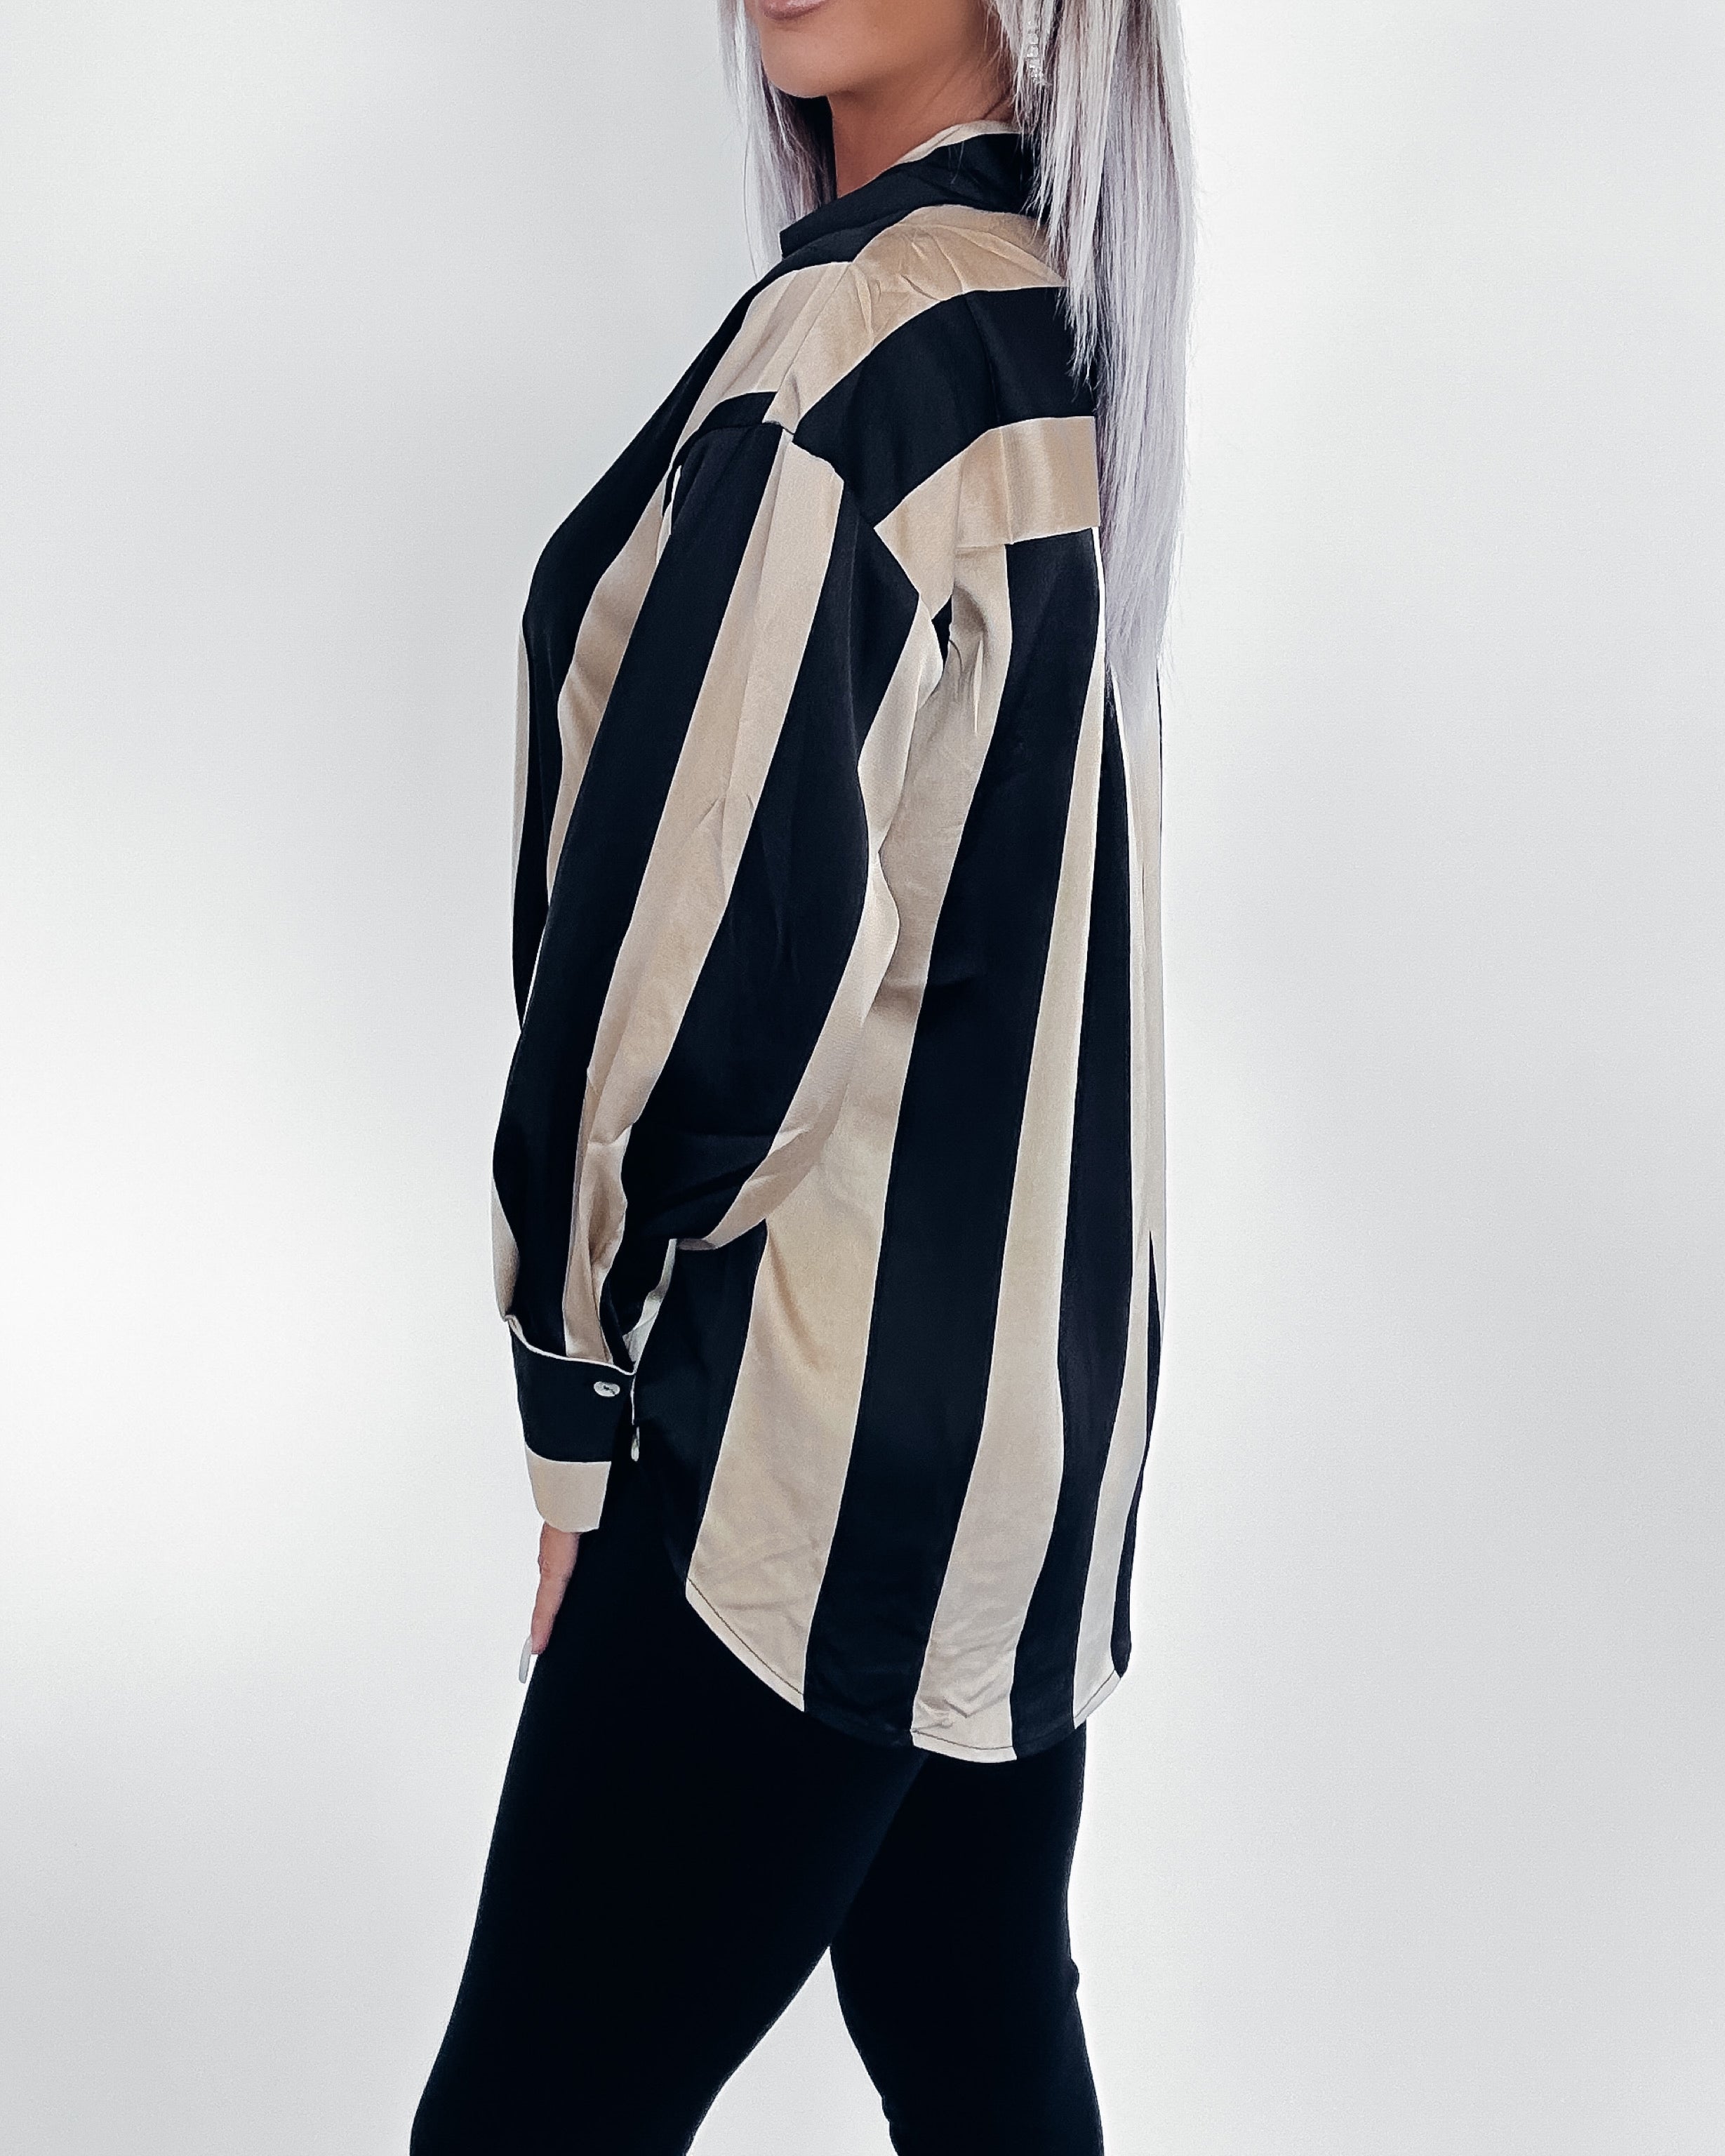 A New Vision Satin Striped Top- Black